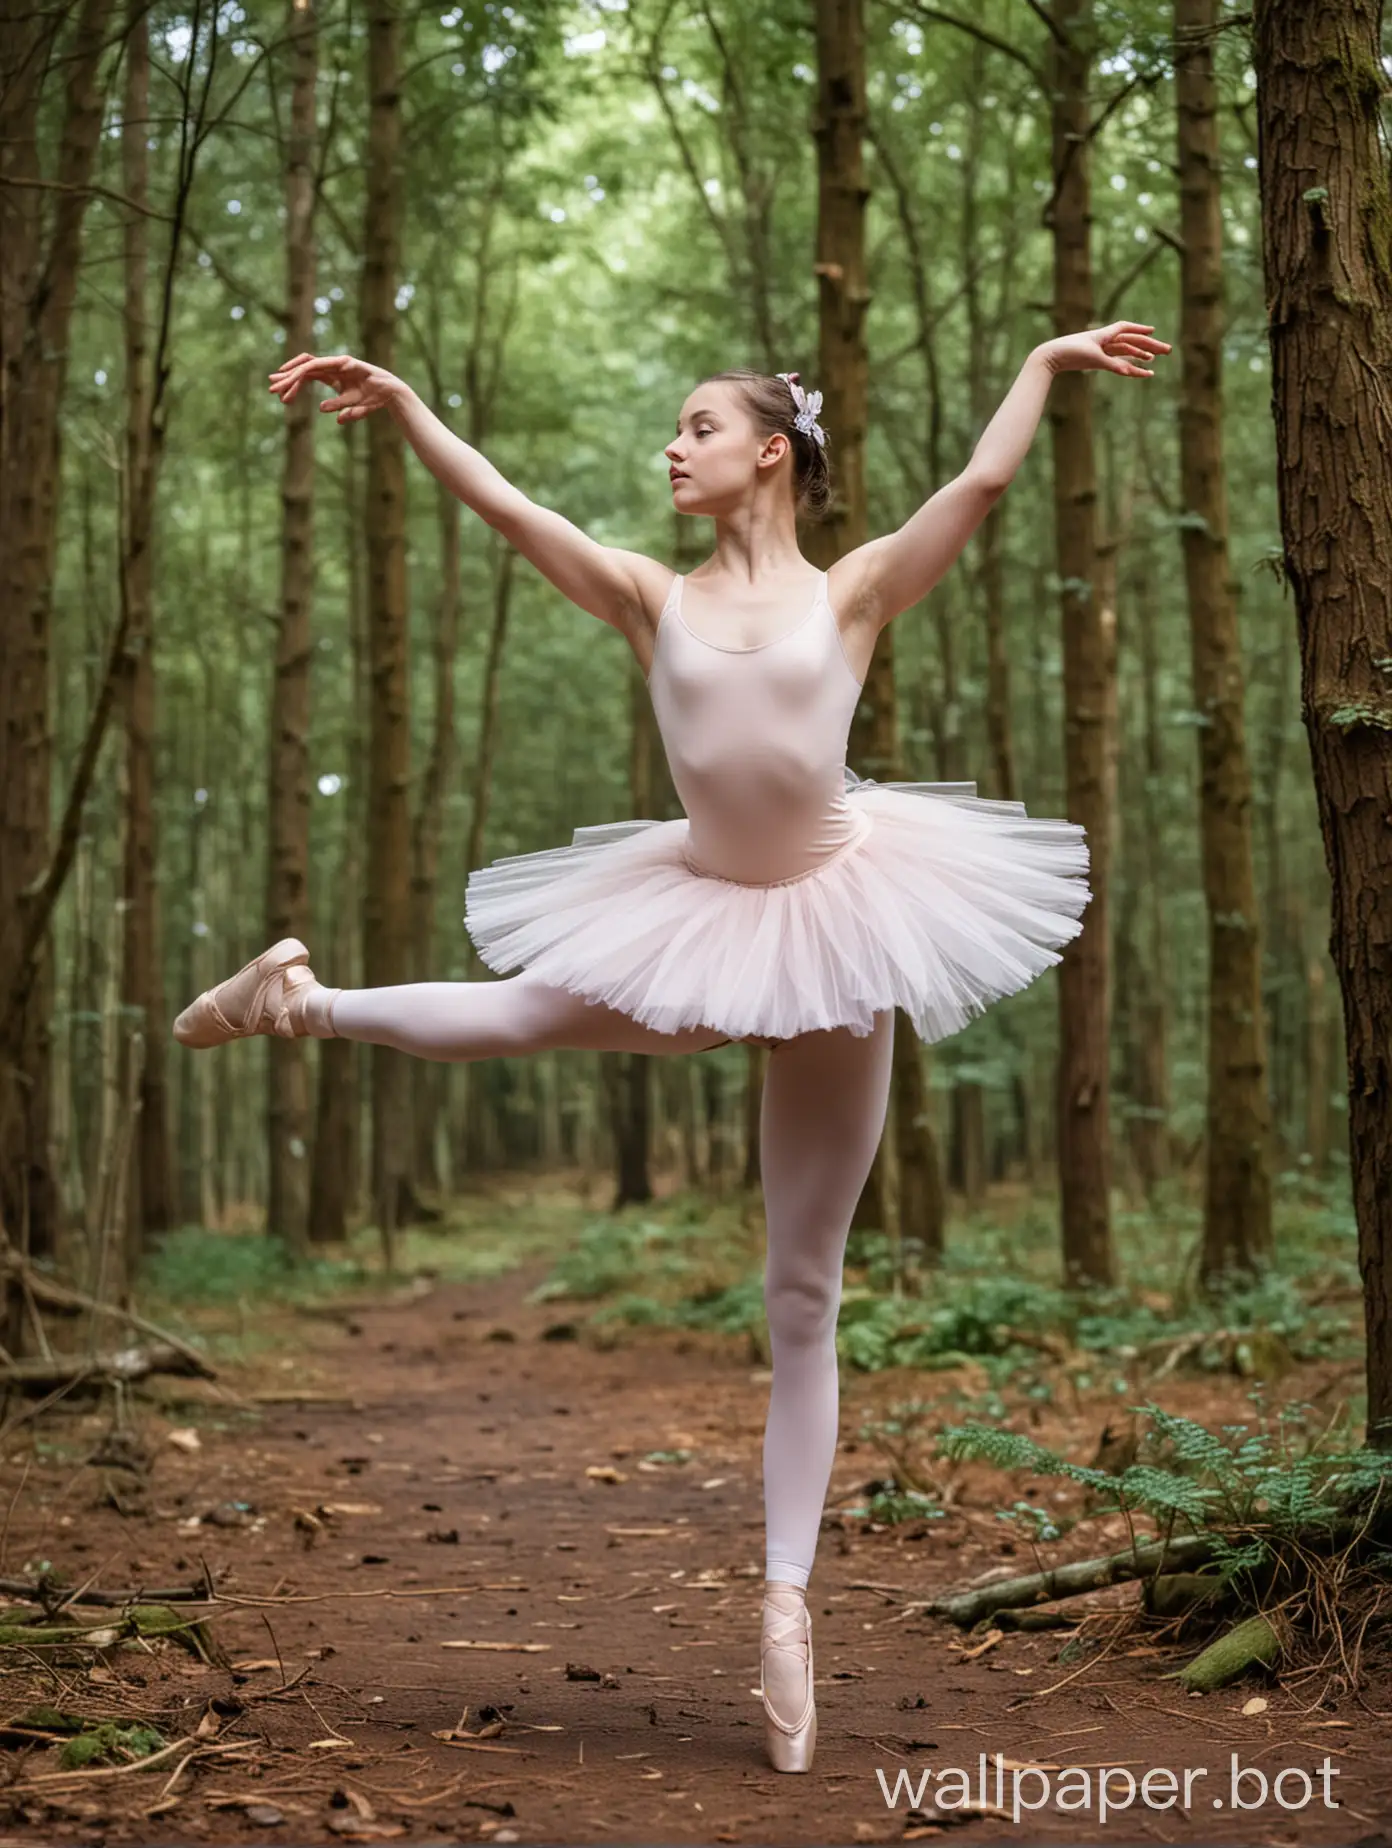 girl, aged 14, performing ballet in a forest setting